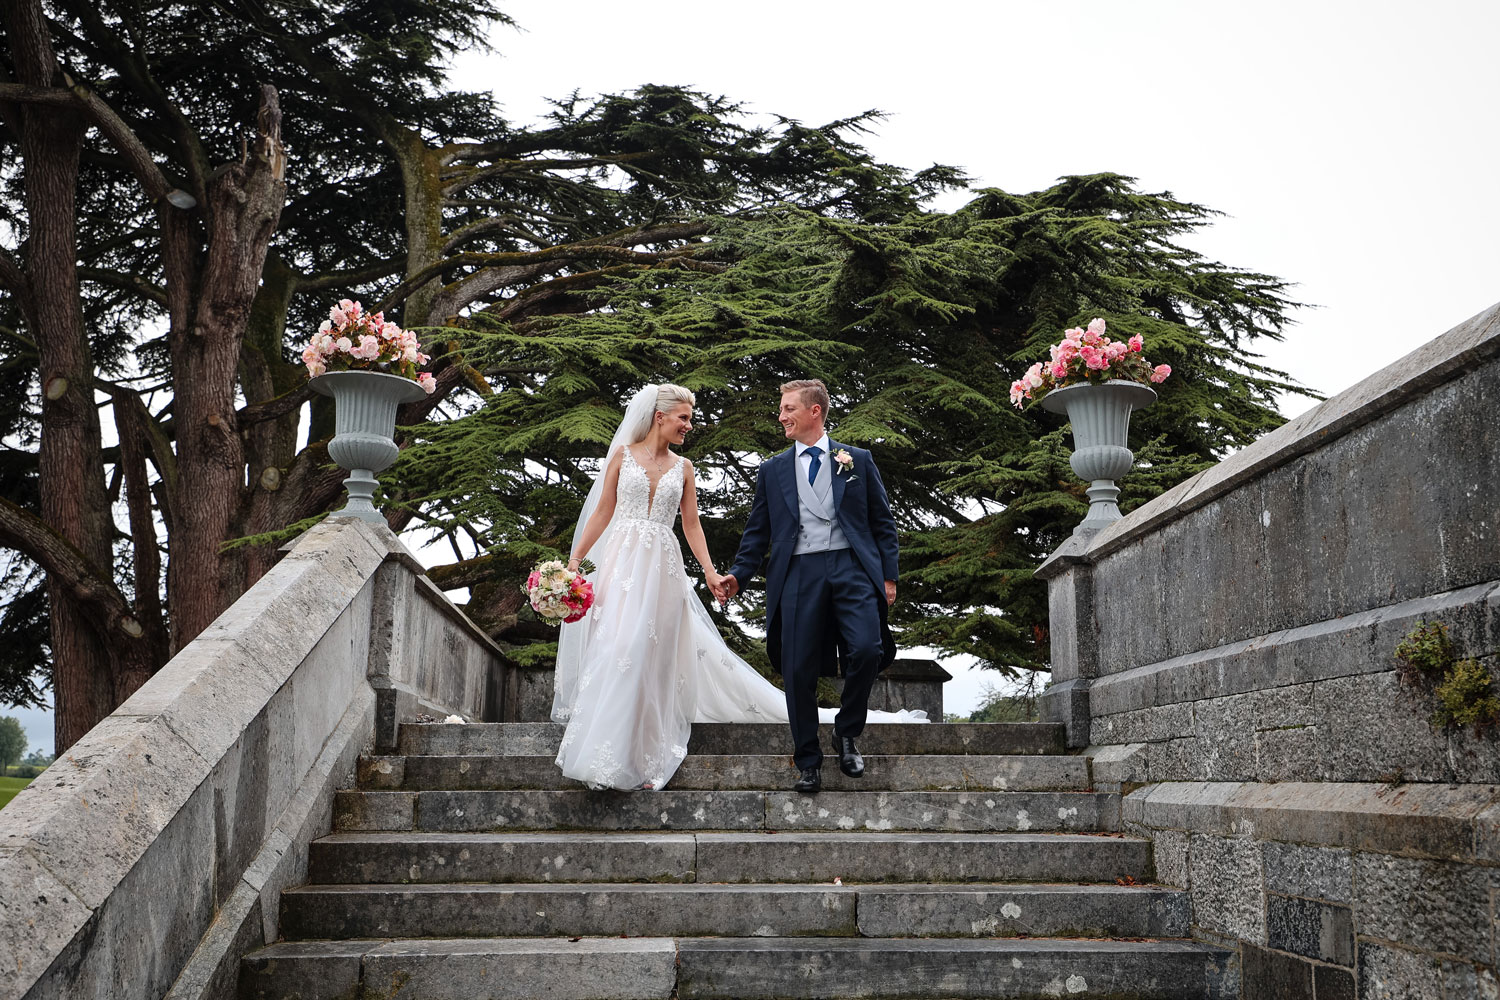 Married couple walking in the grounds of Adare Manor on their wedding day